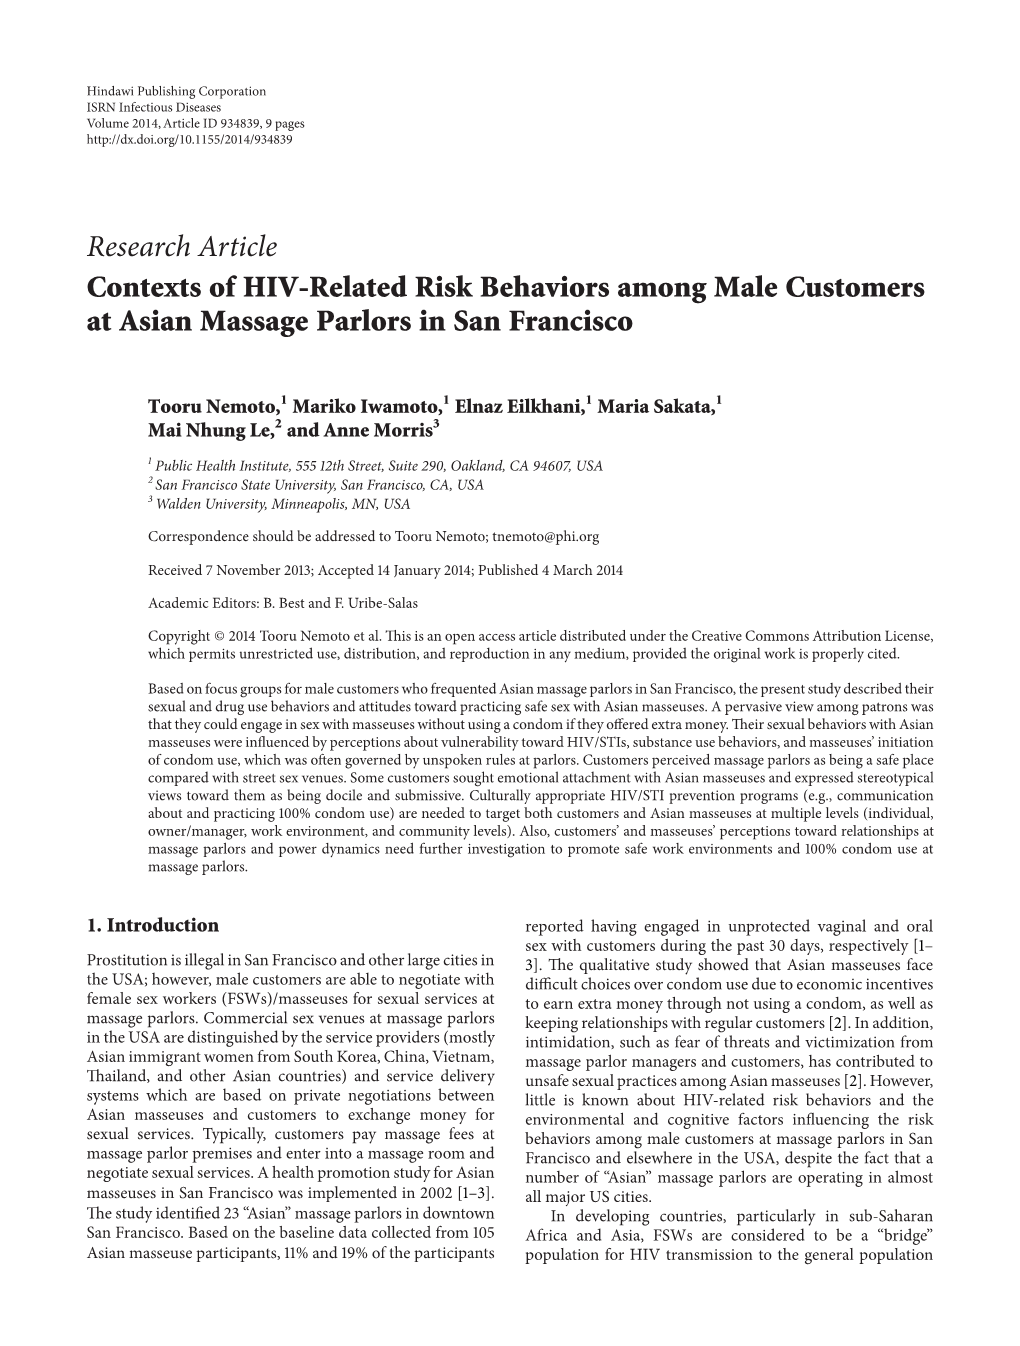 Contexts of HIV-Related Risk Behaviors Among Male Customers at Asian Massage Parlors in San Francisco